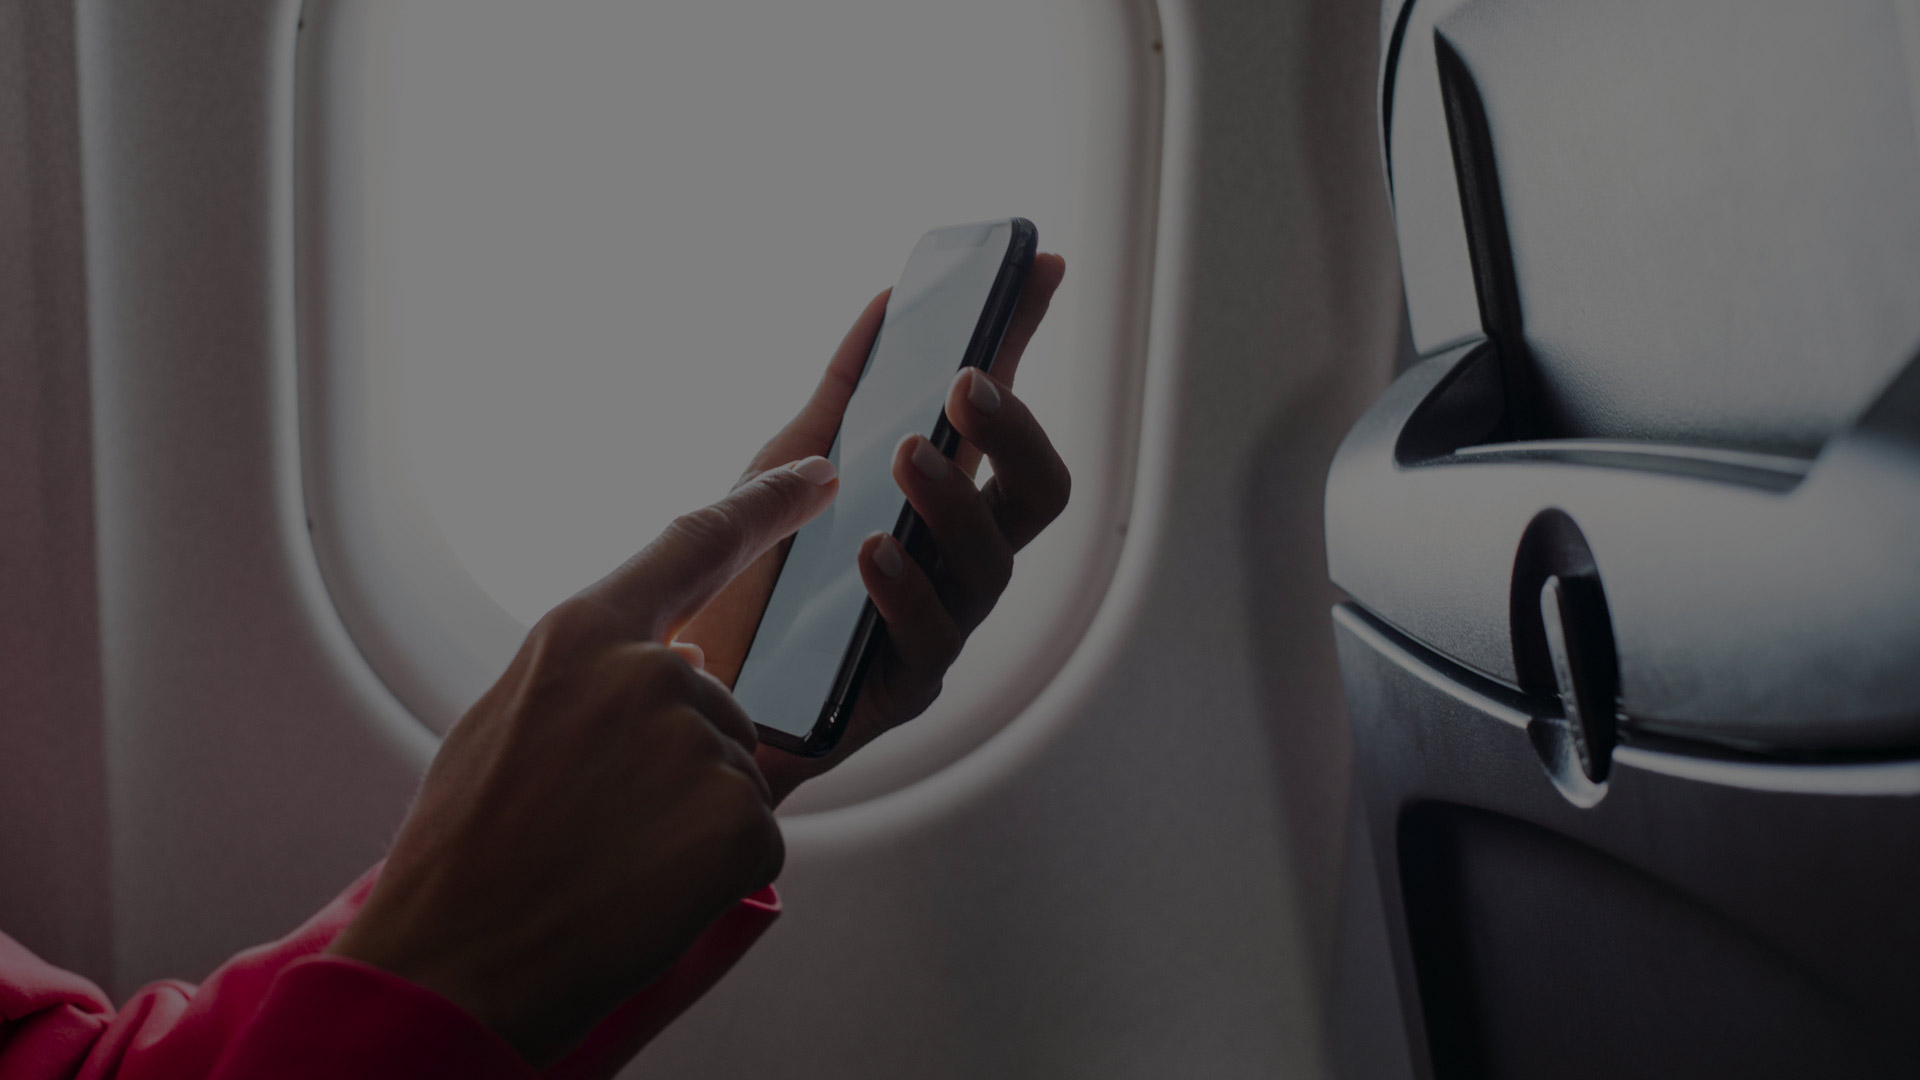 A person uses a mobile phone while sitting next to an airplane window.